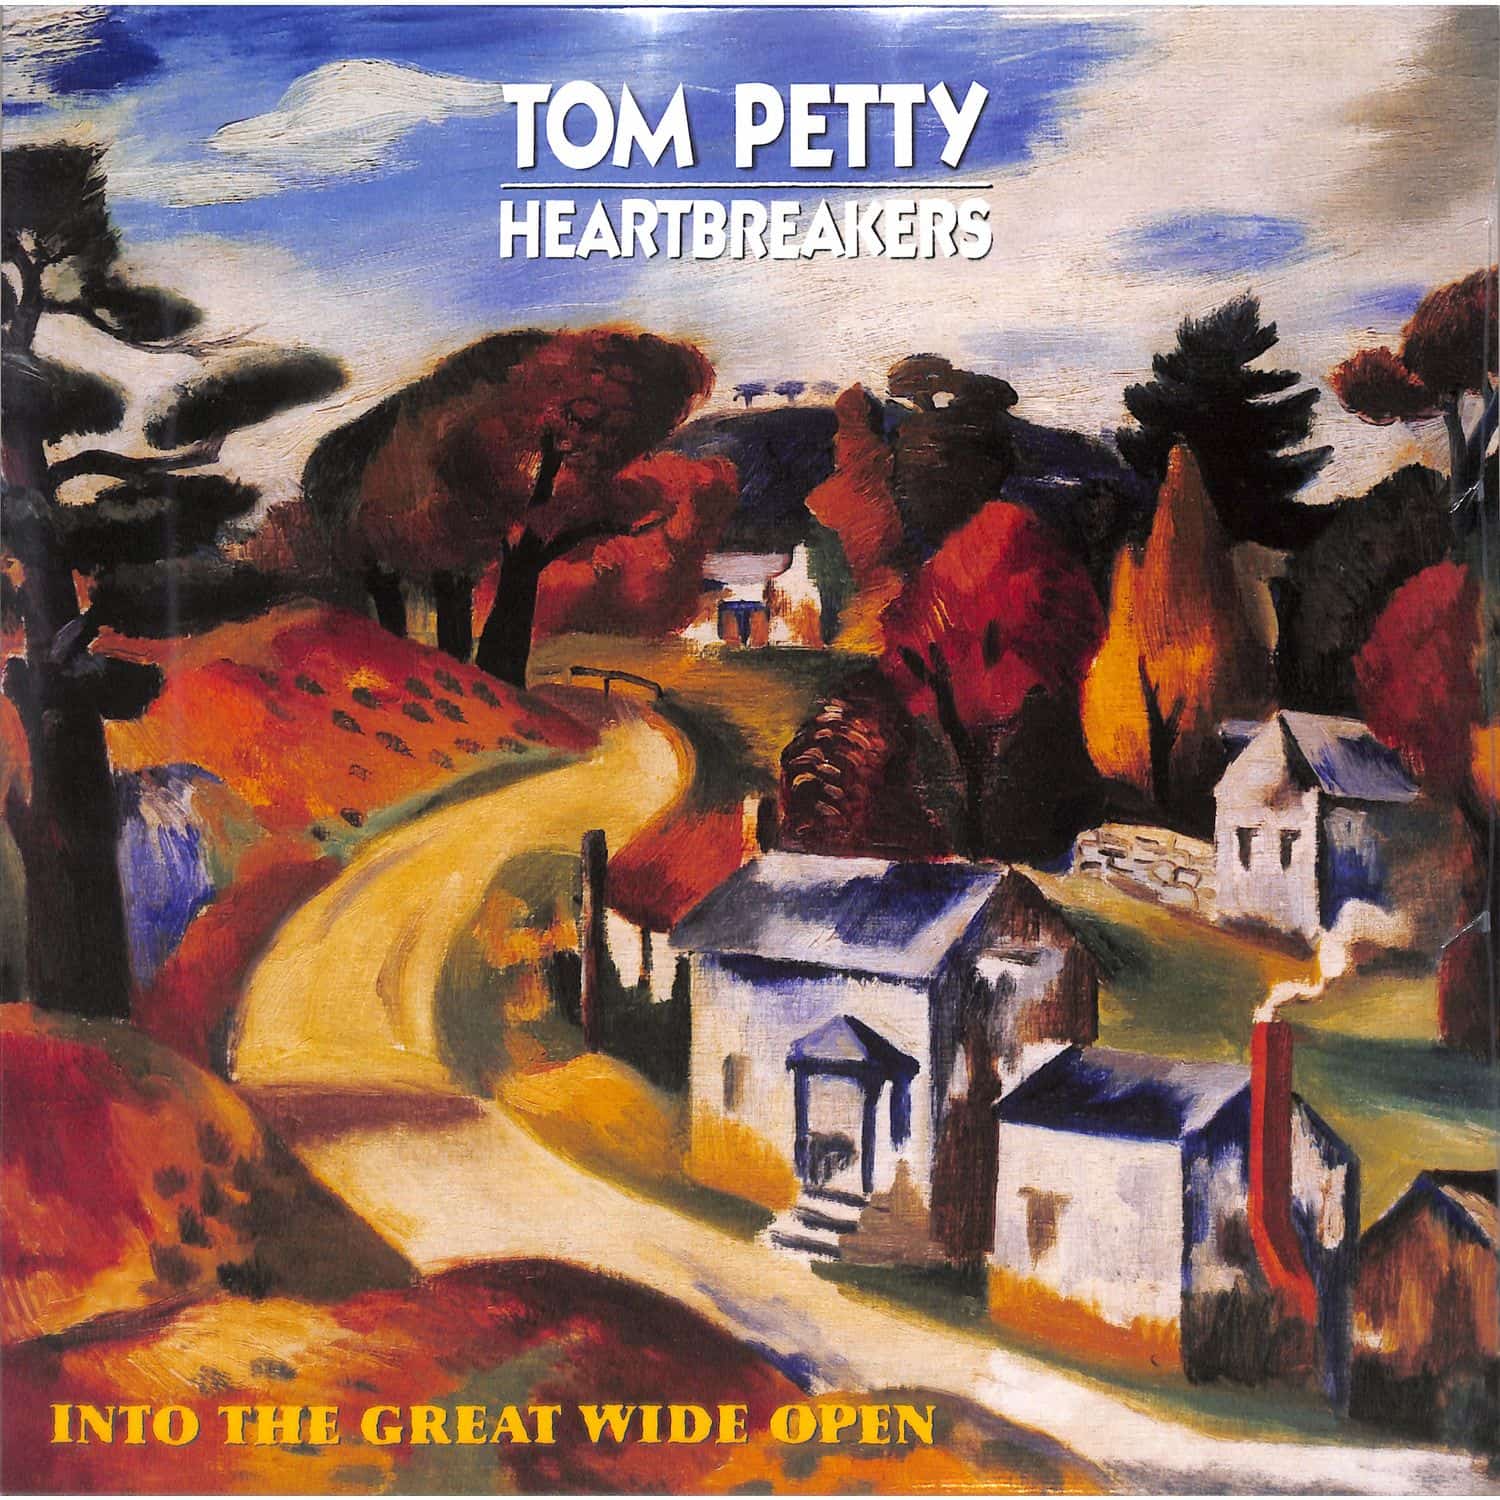 Tom Petty & The Heartbreakers - INTO THE GREAT WIDE OPEN 